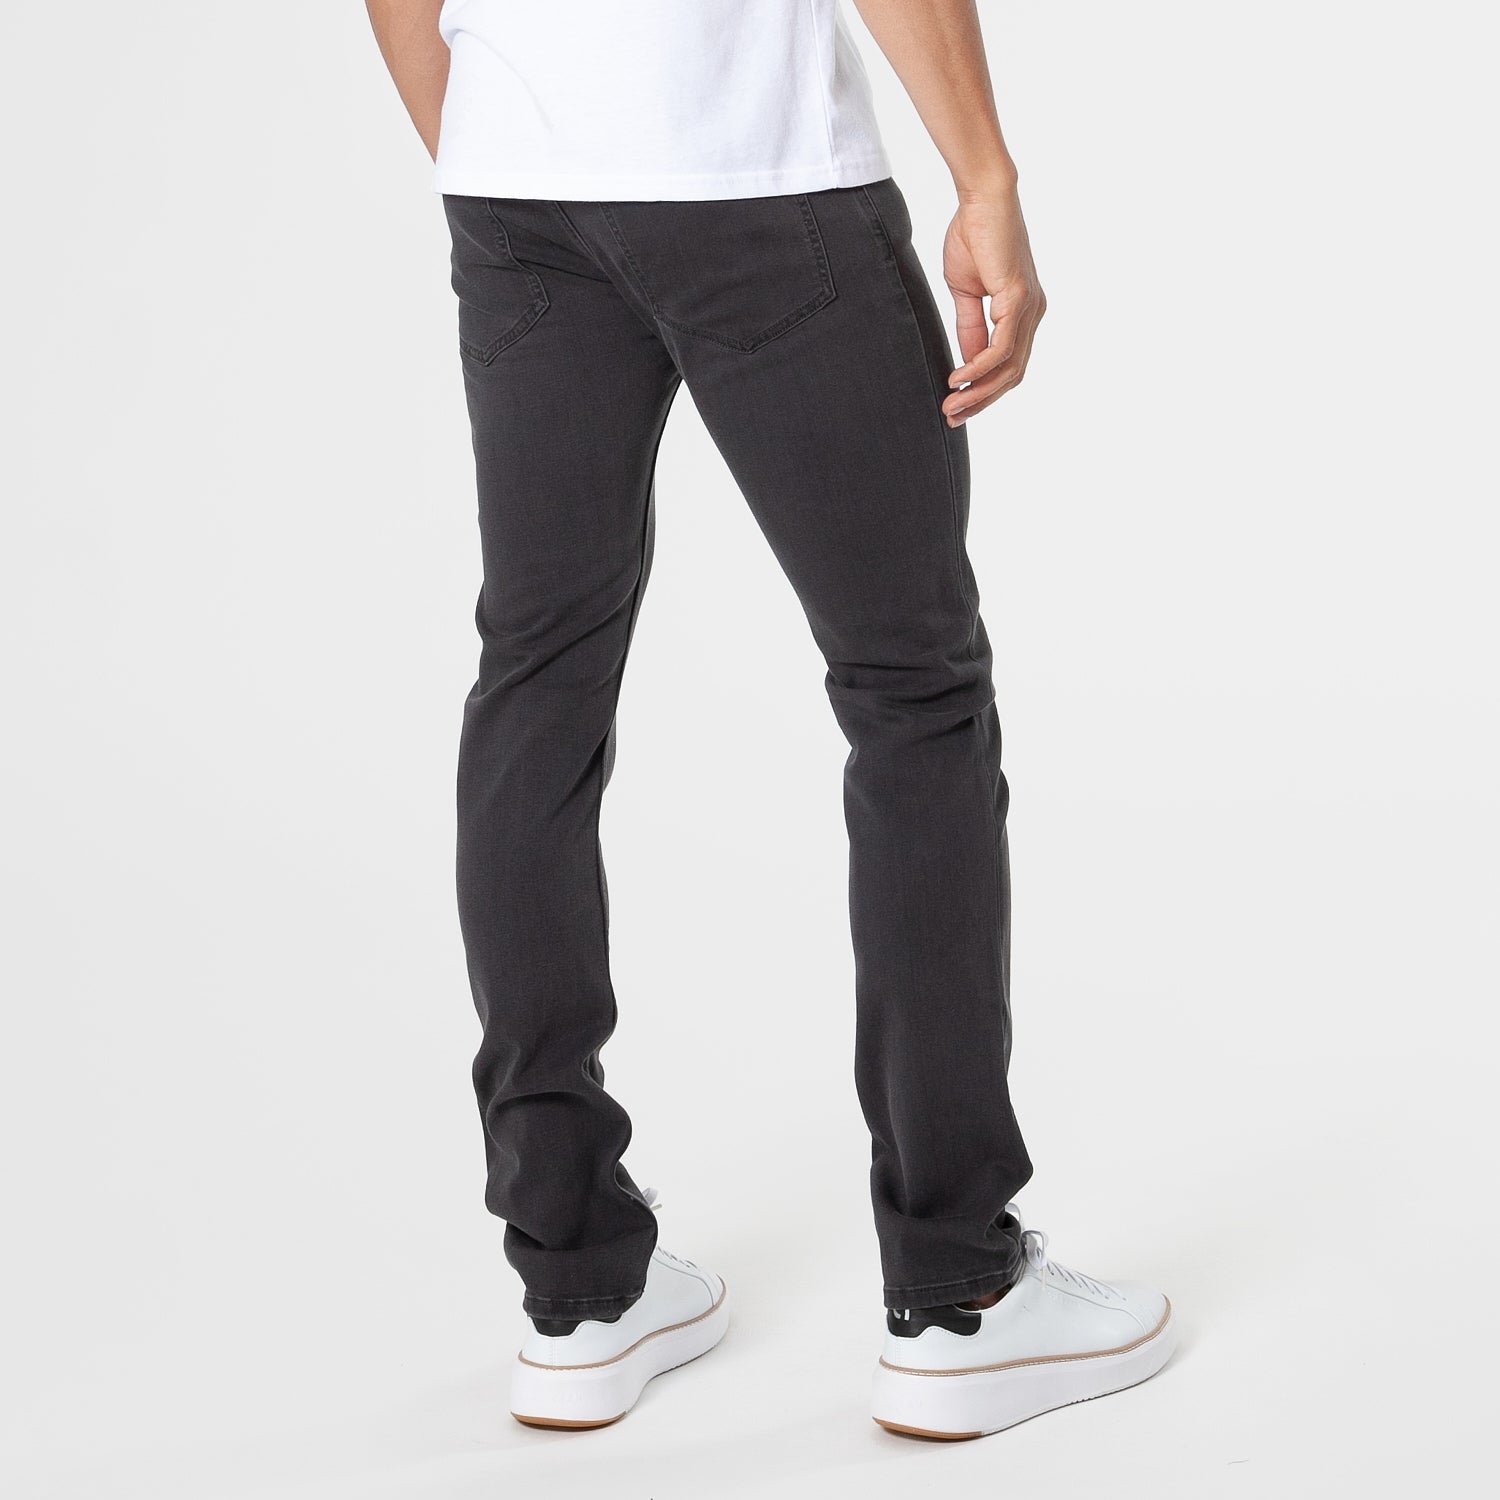 Black and Gray Slim Fit Comfort Jeans 2-Pack